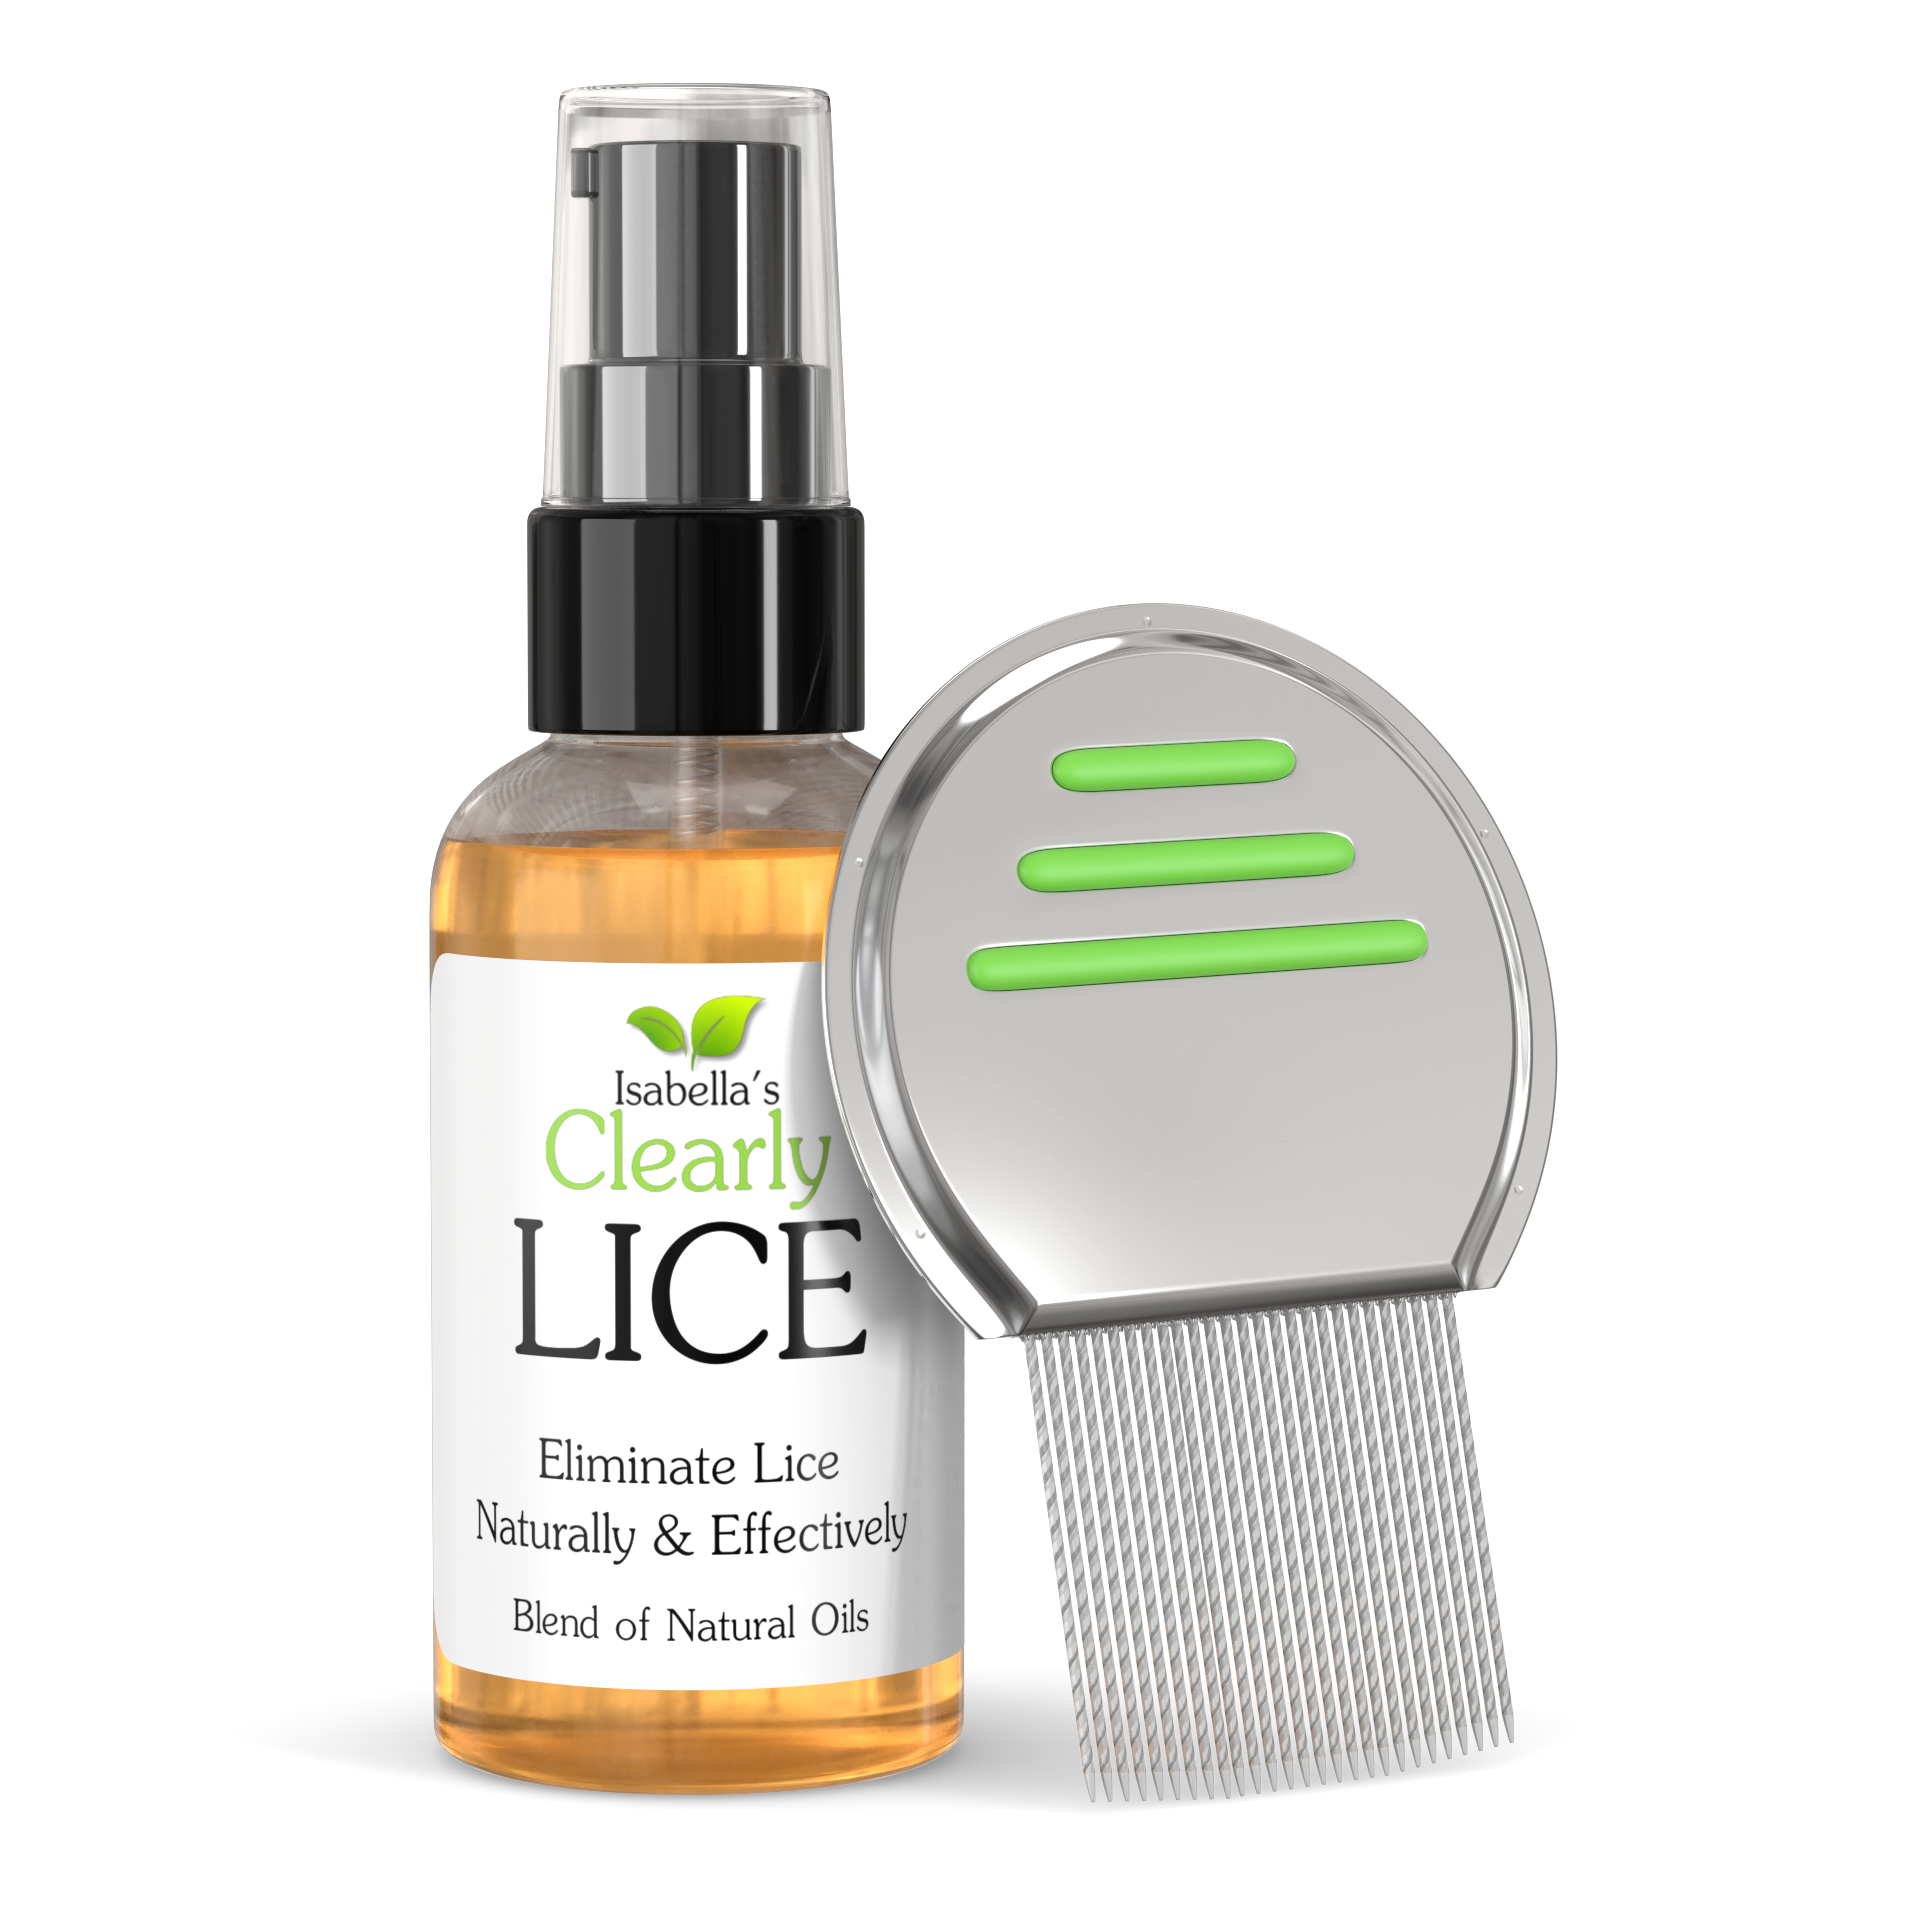 HairShield  Are you still using the Lice Removal Shampoo that claims it  will take 4 Sundays to remove lice Then Please Stop  Use Hairshield  Anti Lice Cream Wash to completely